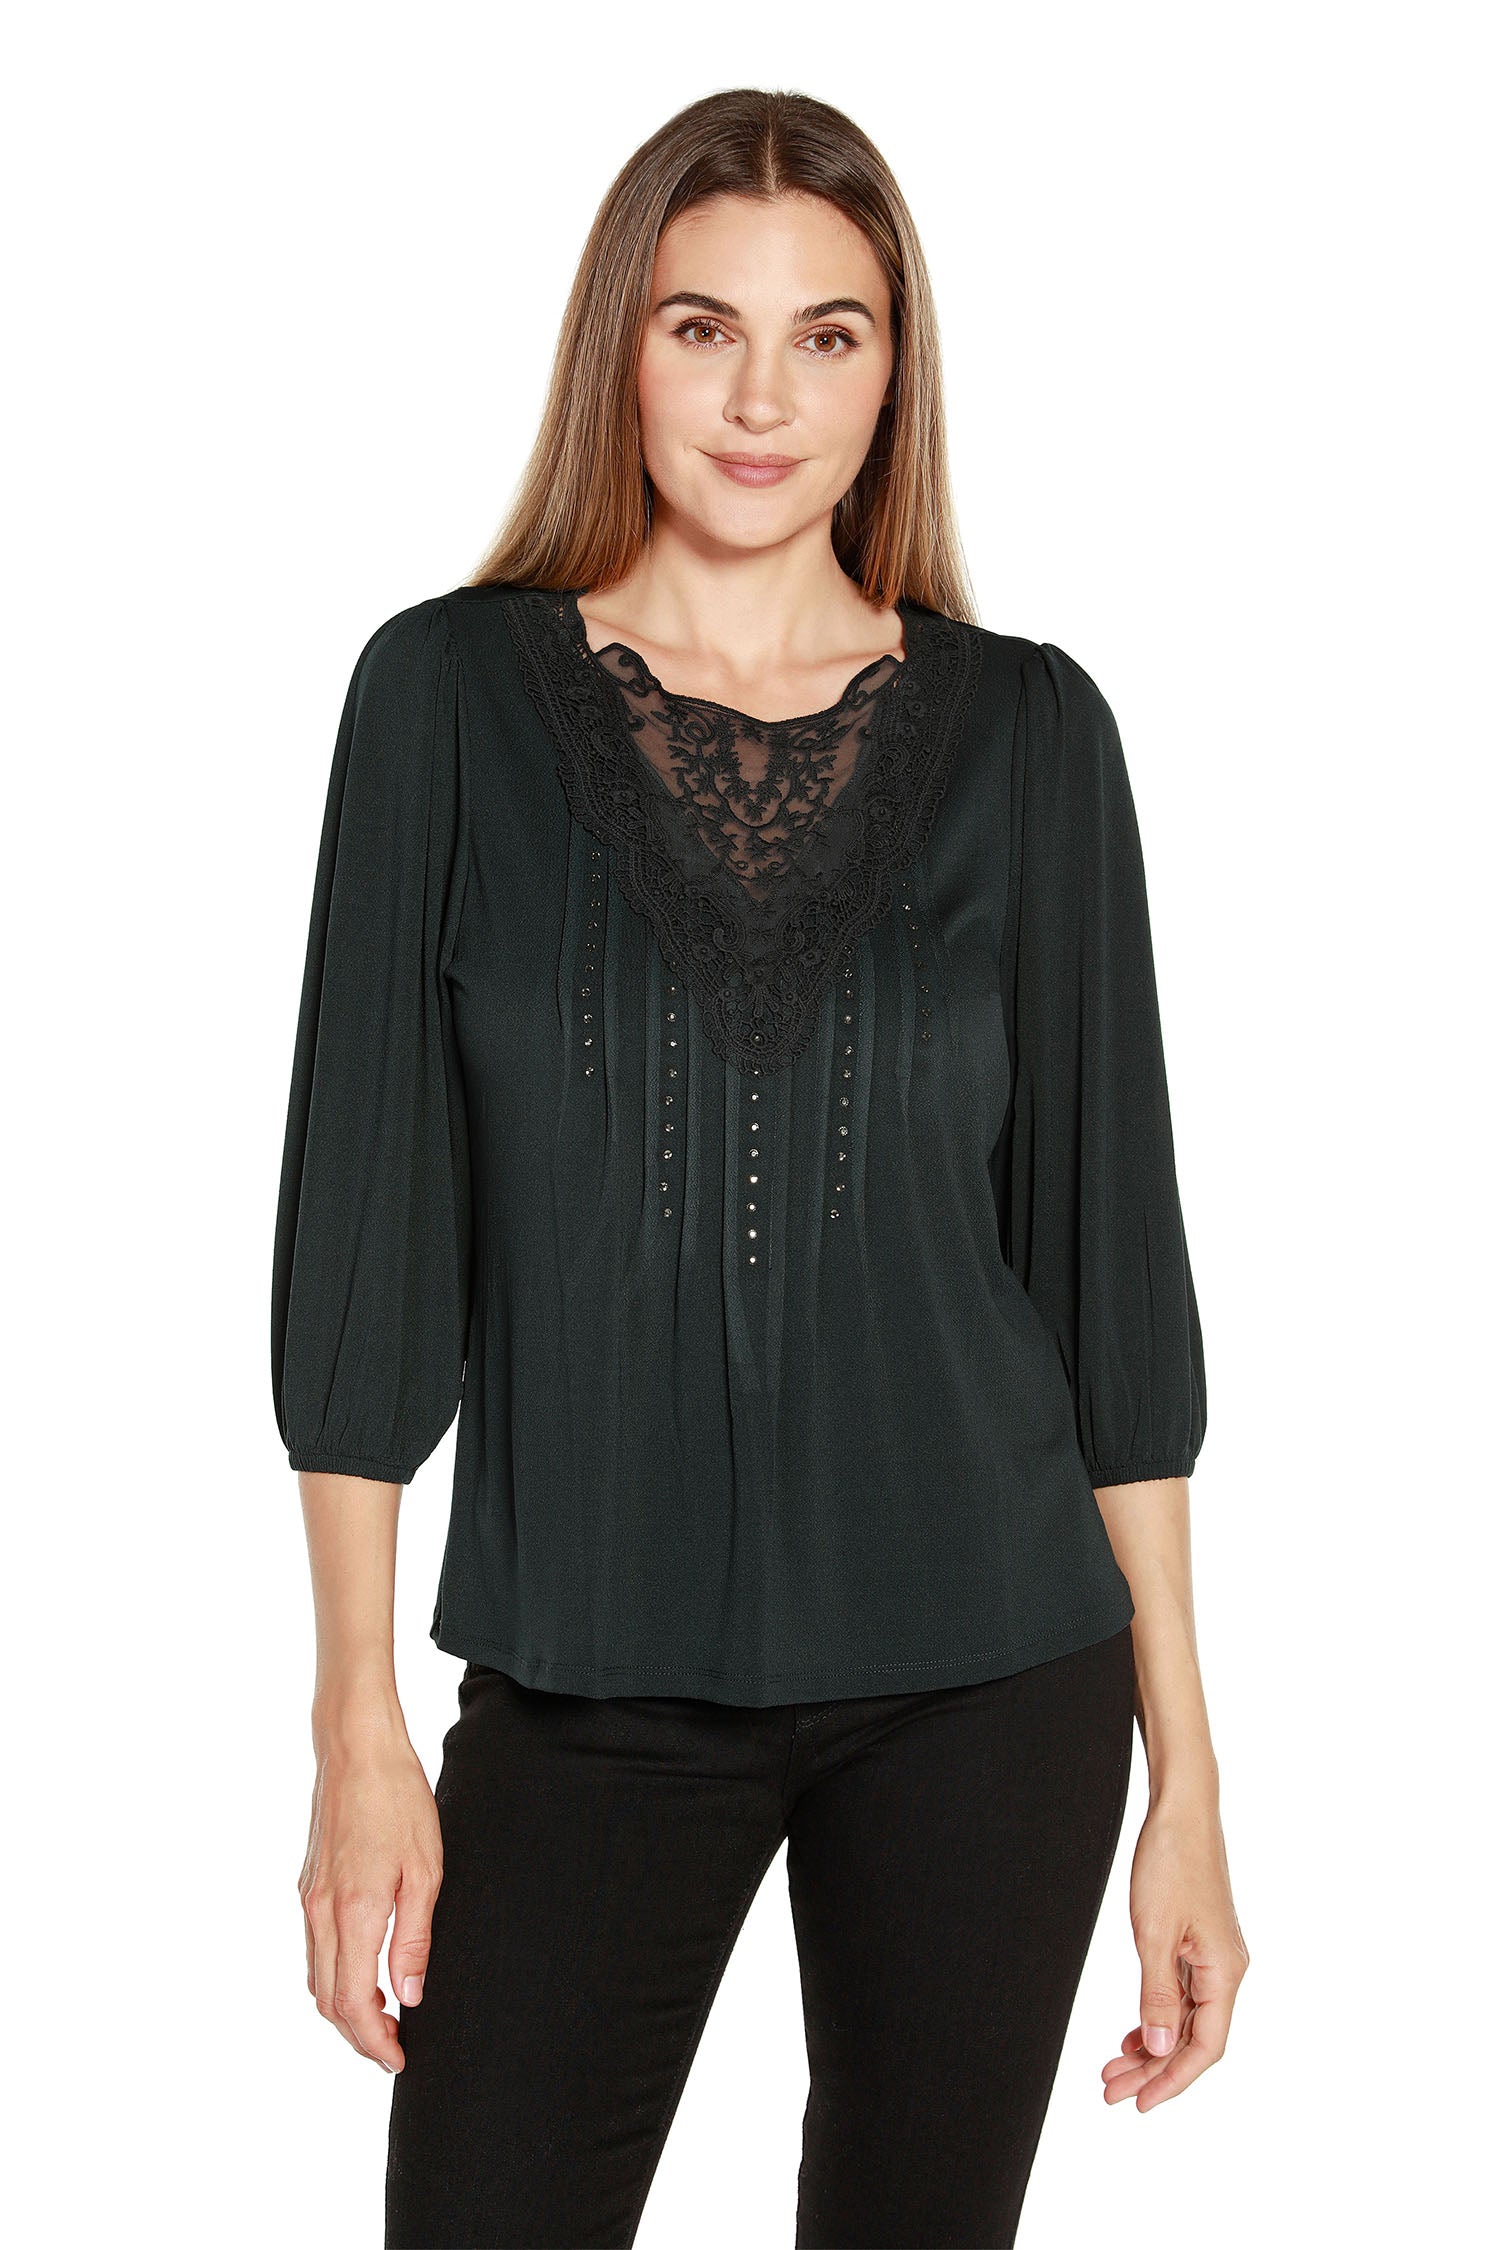 Women's Loose Fit Pullover Blouse with Delicate Lace Insets